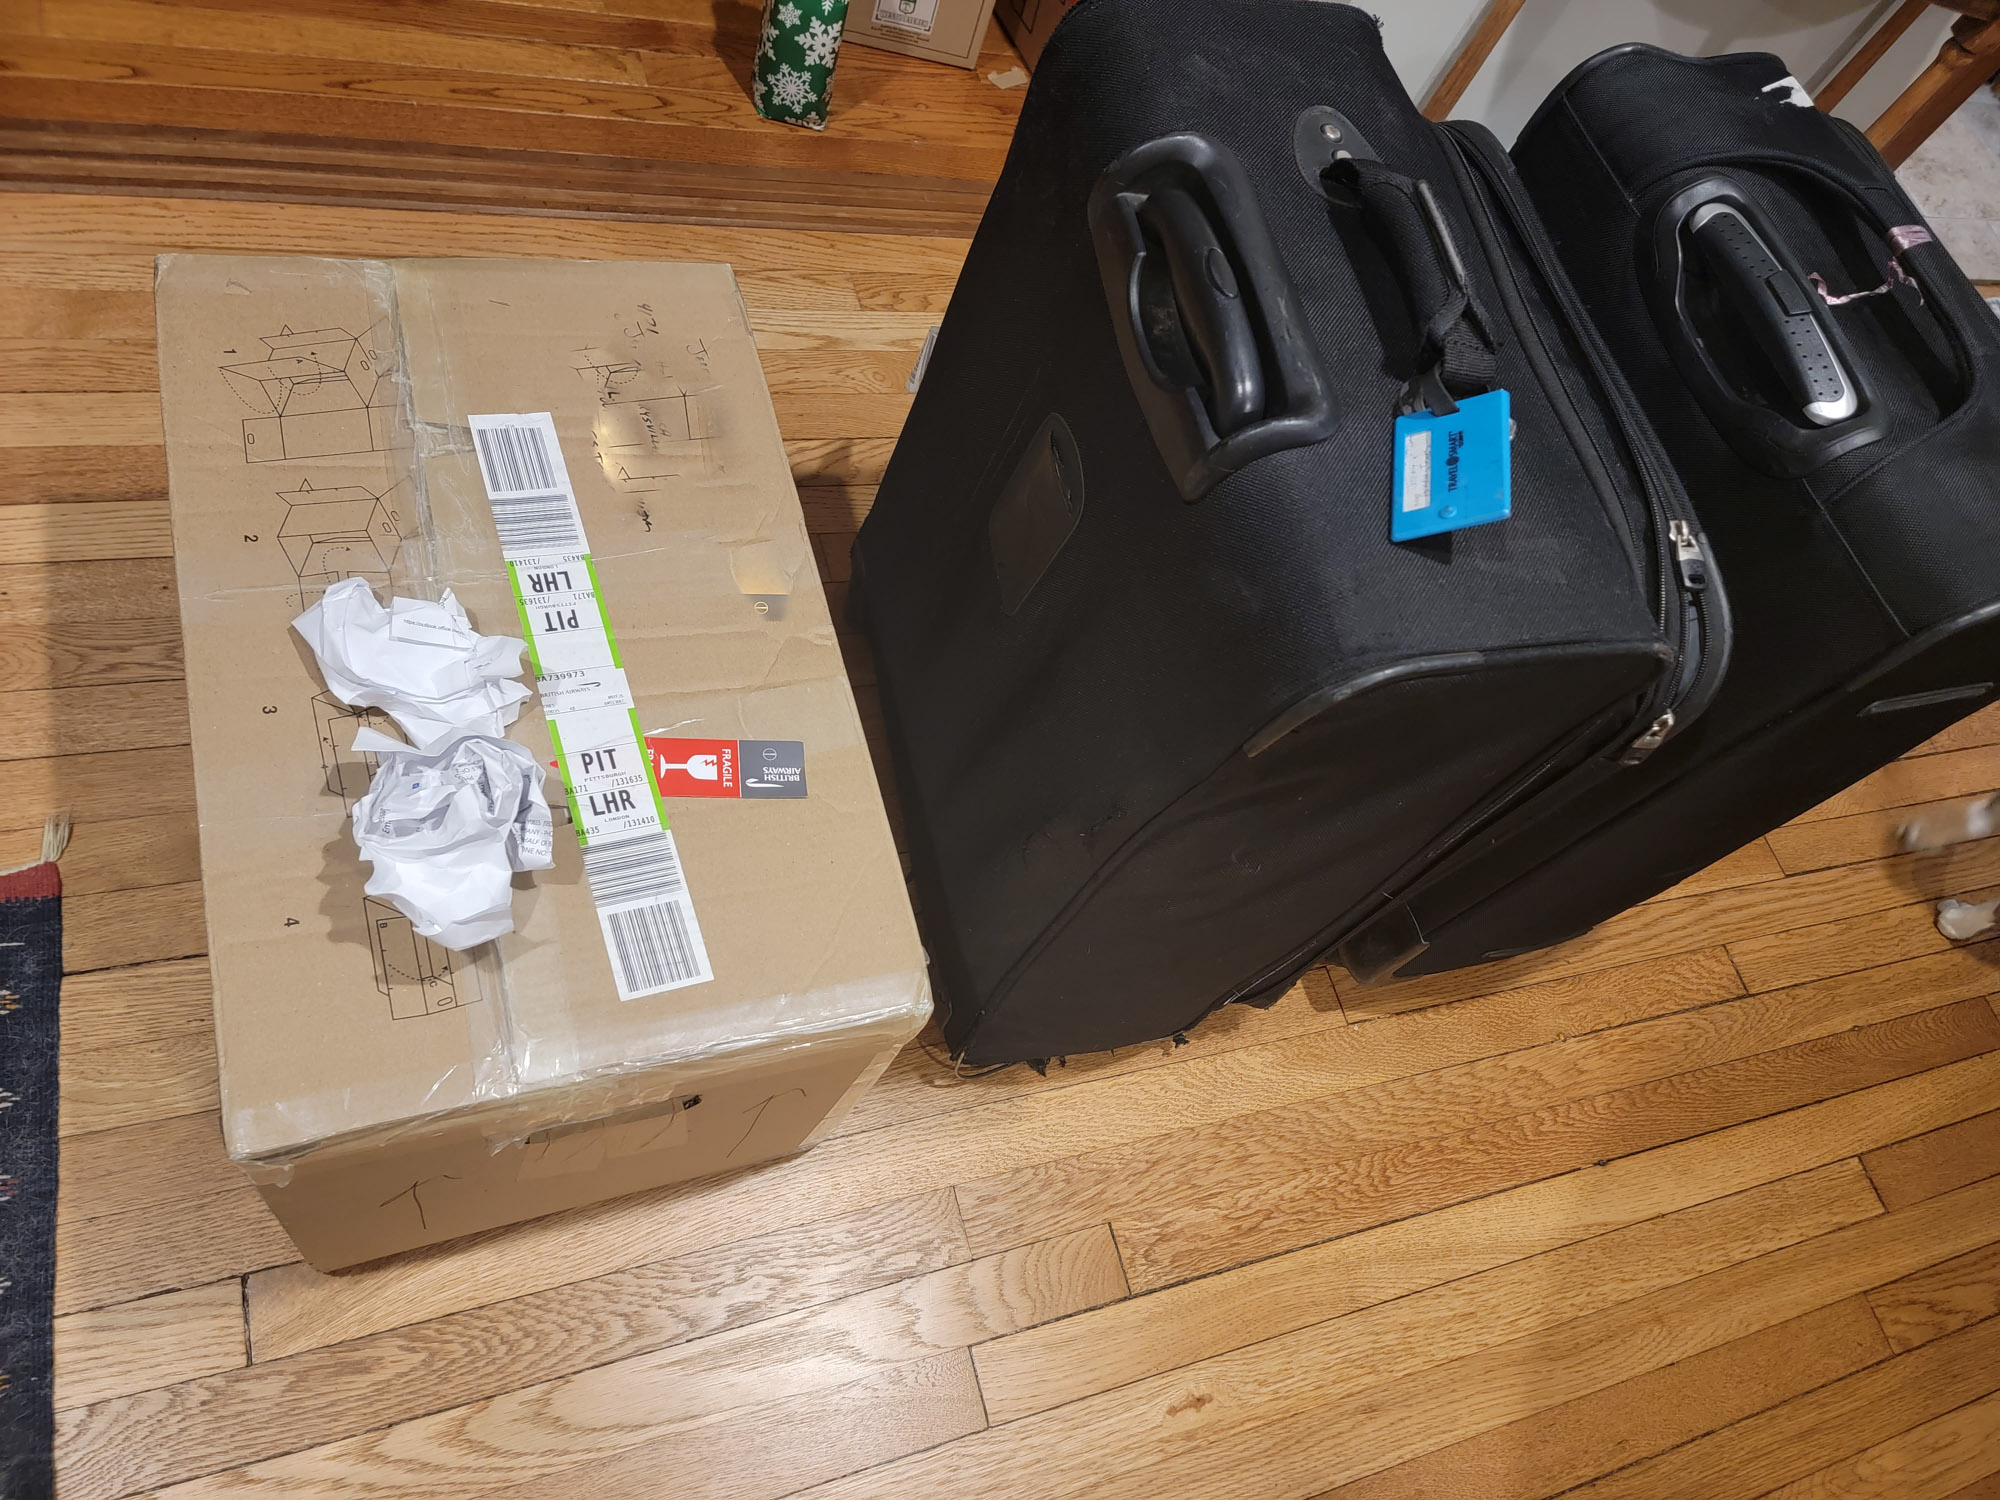 Lost Bags Delivered 48 Hours Later